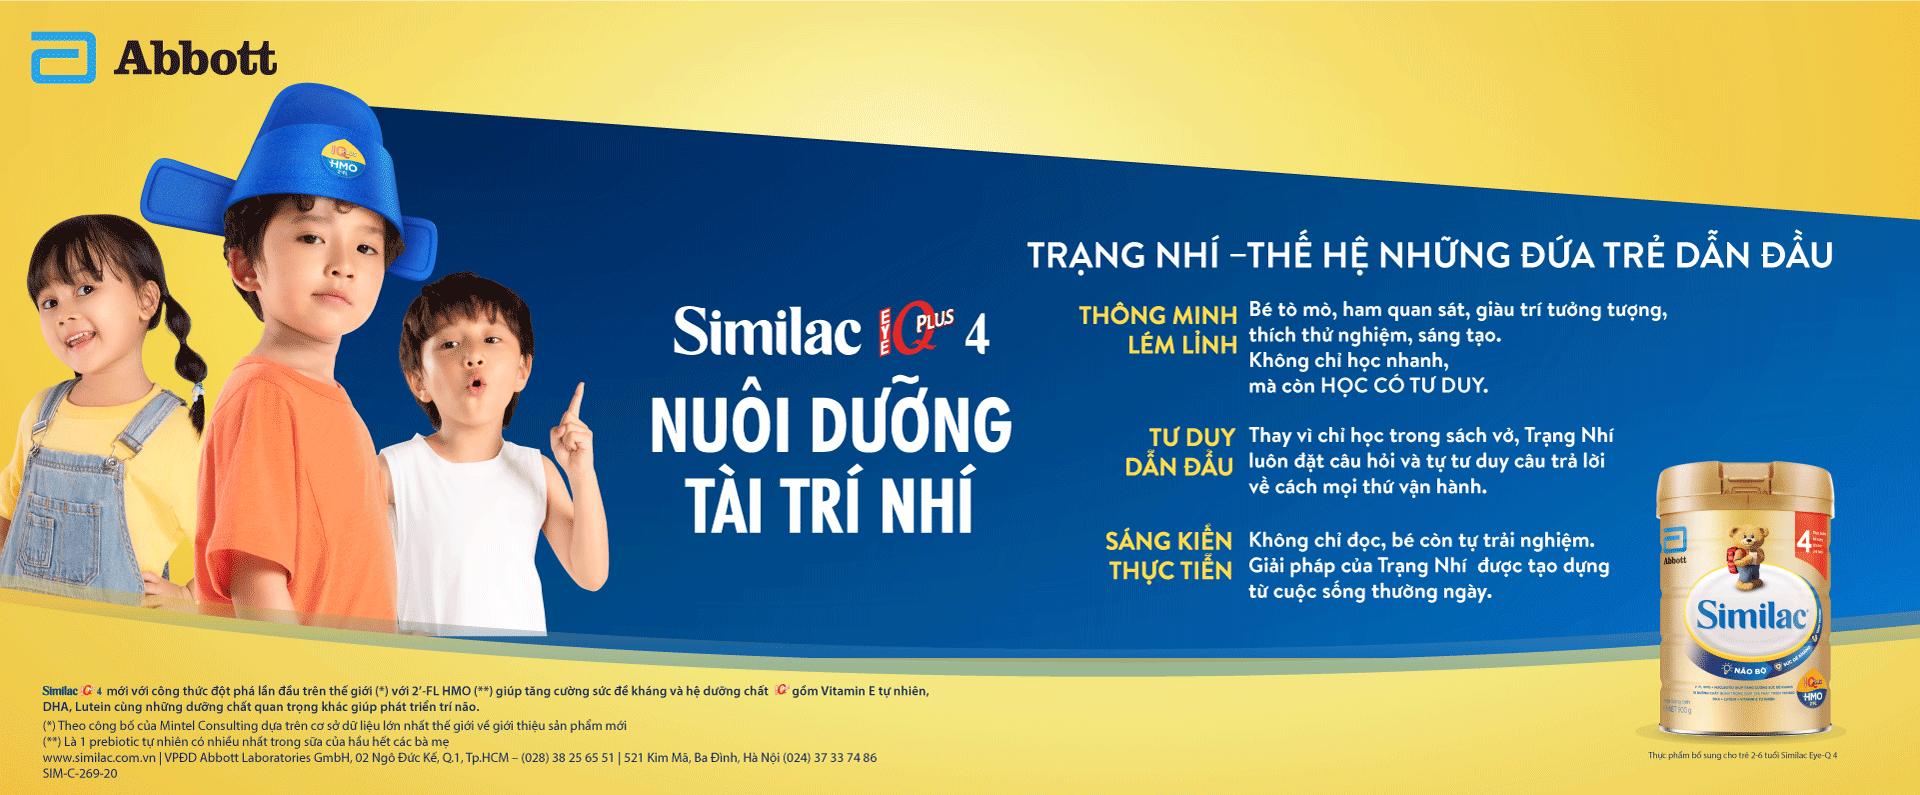 Similac-4-nuoi-duong-banner